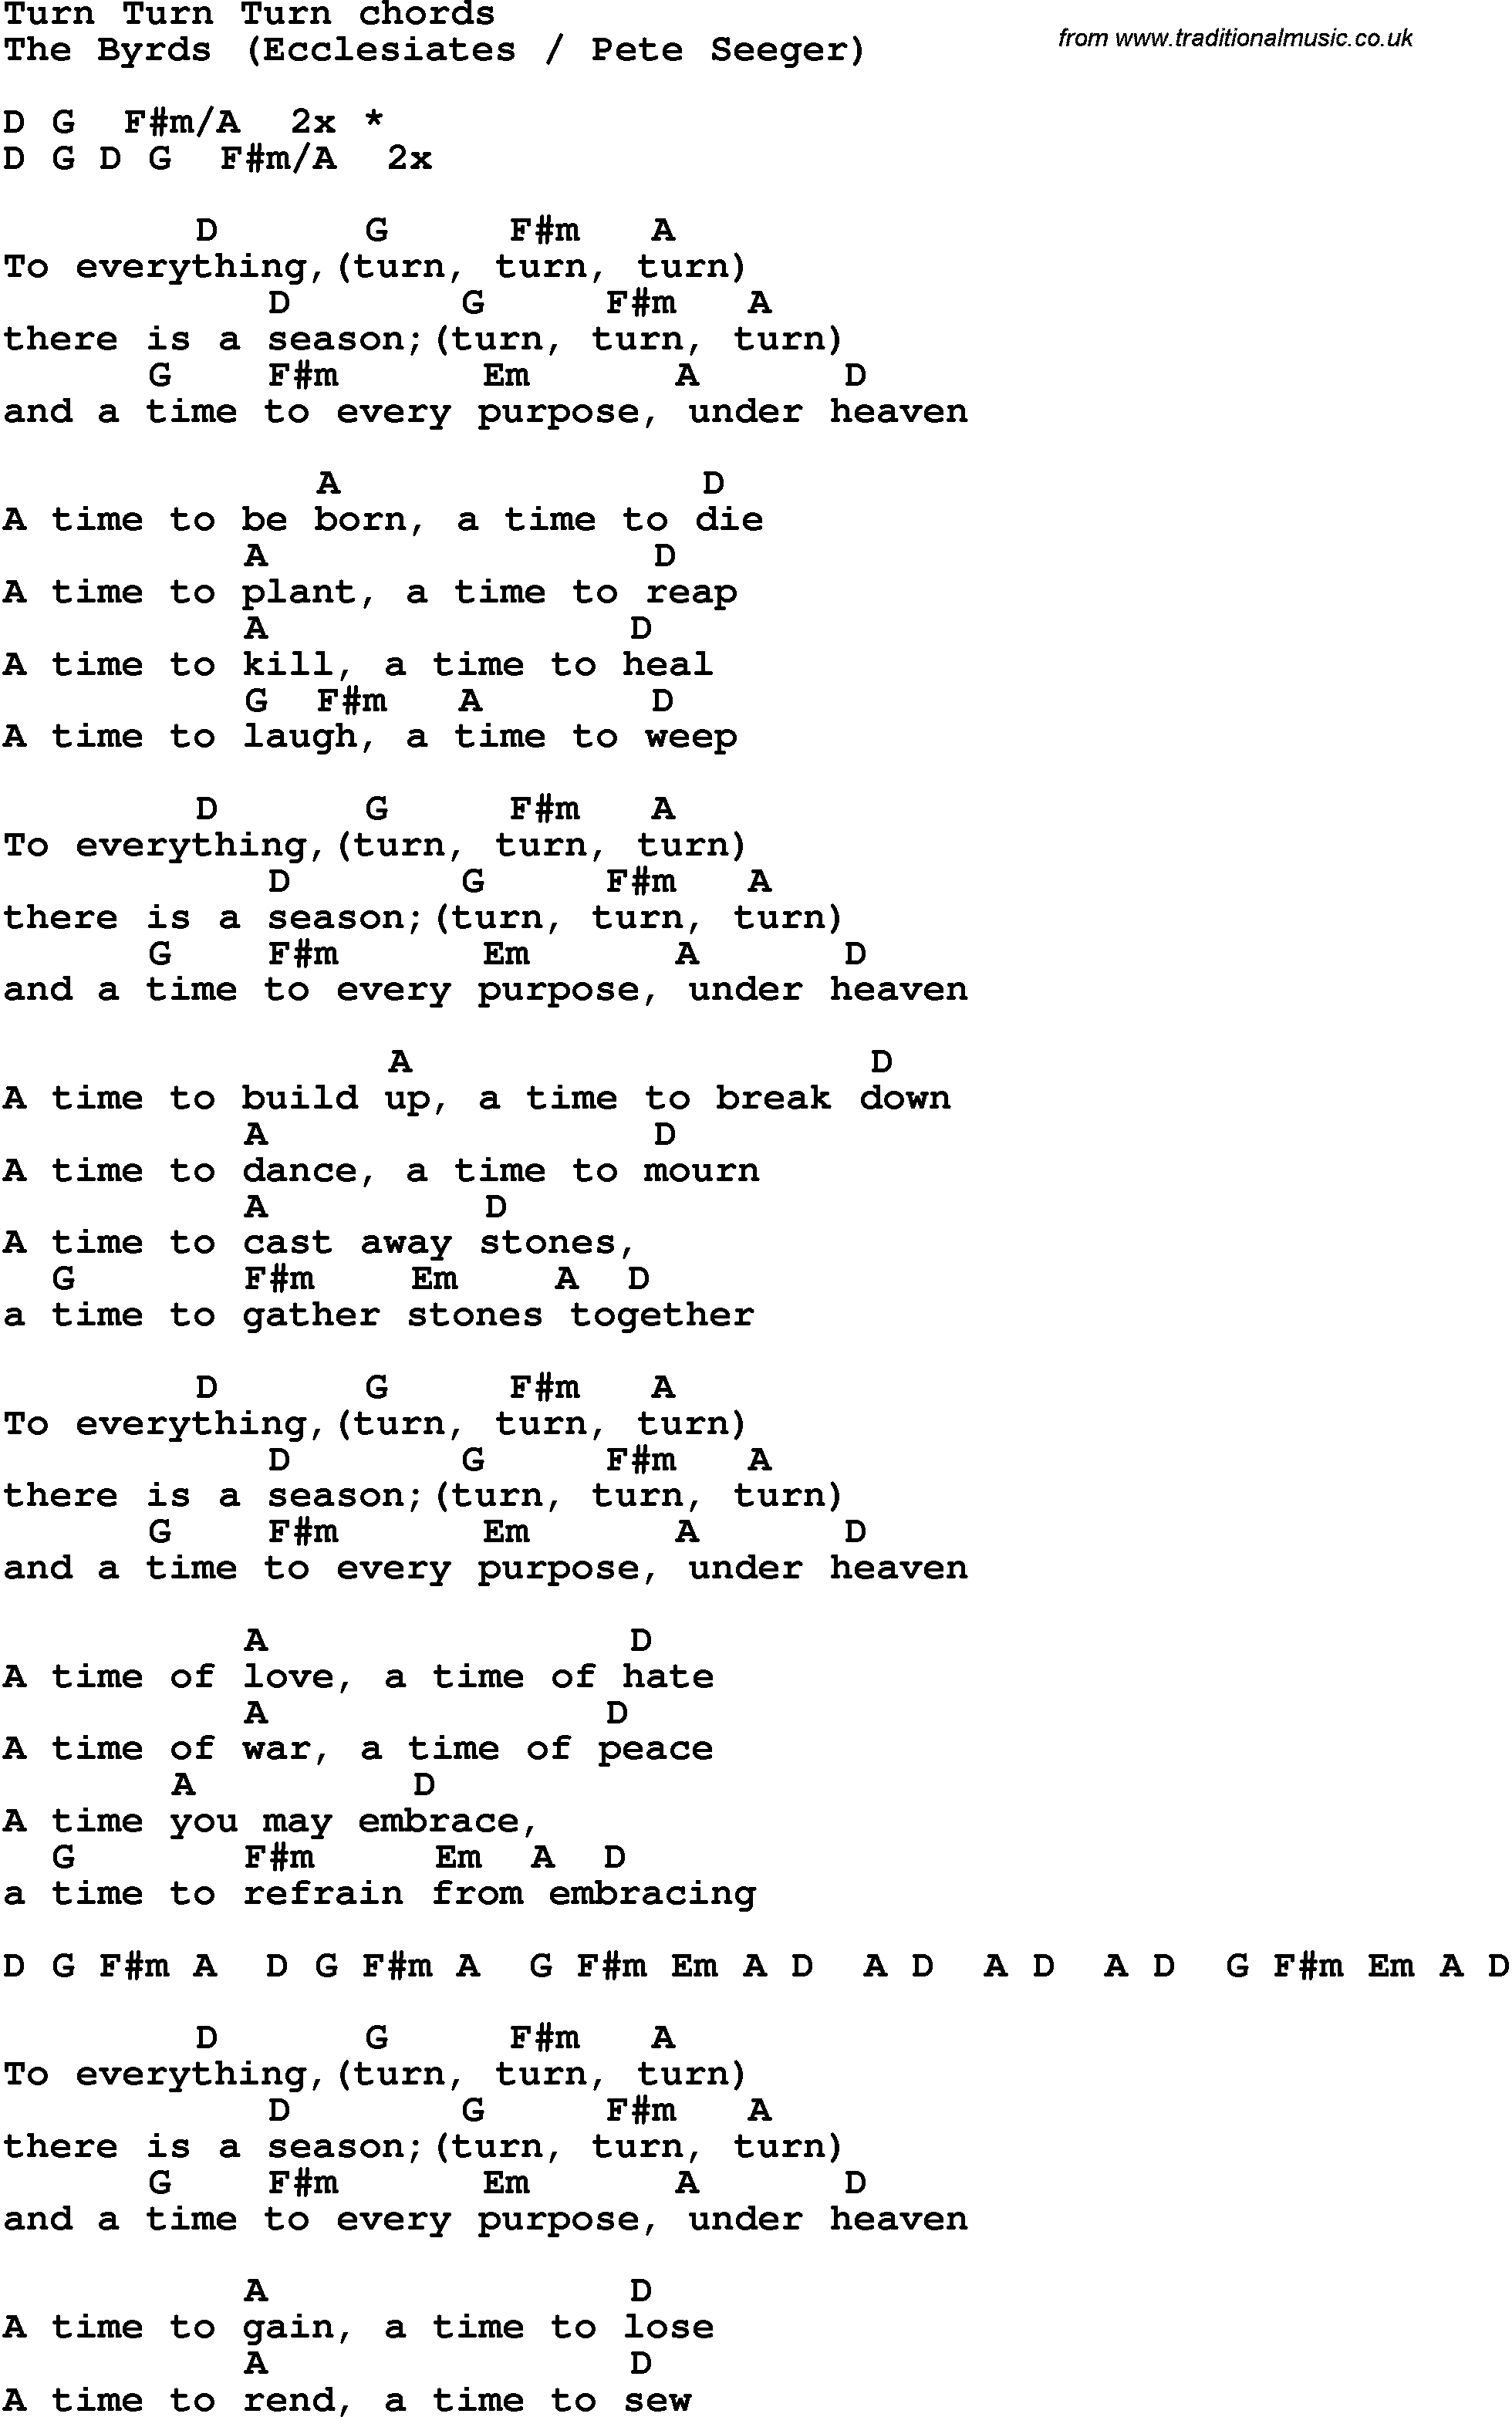 Song Lyrics with guitar chords for Turn Turn Turn